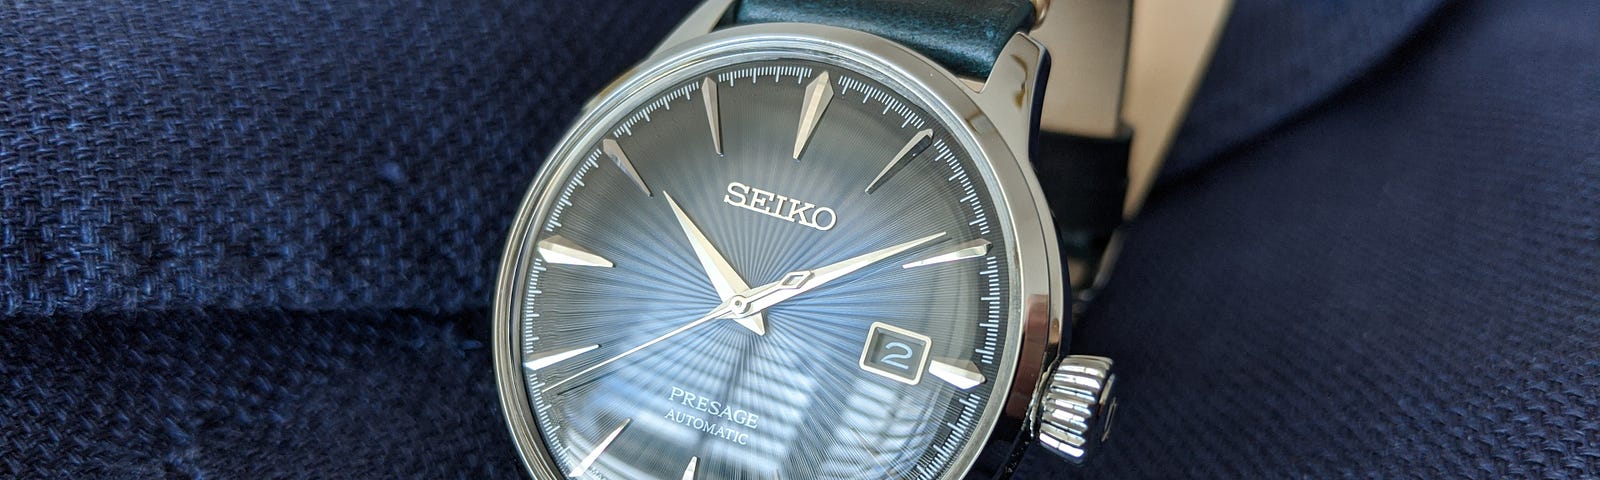 Seiko SRPB41 on a suit jacket